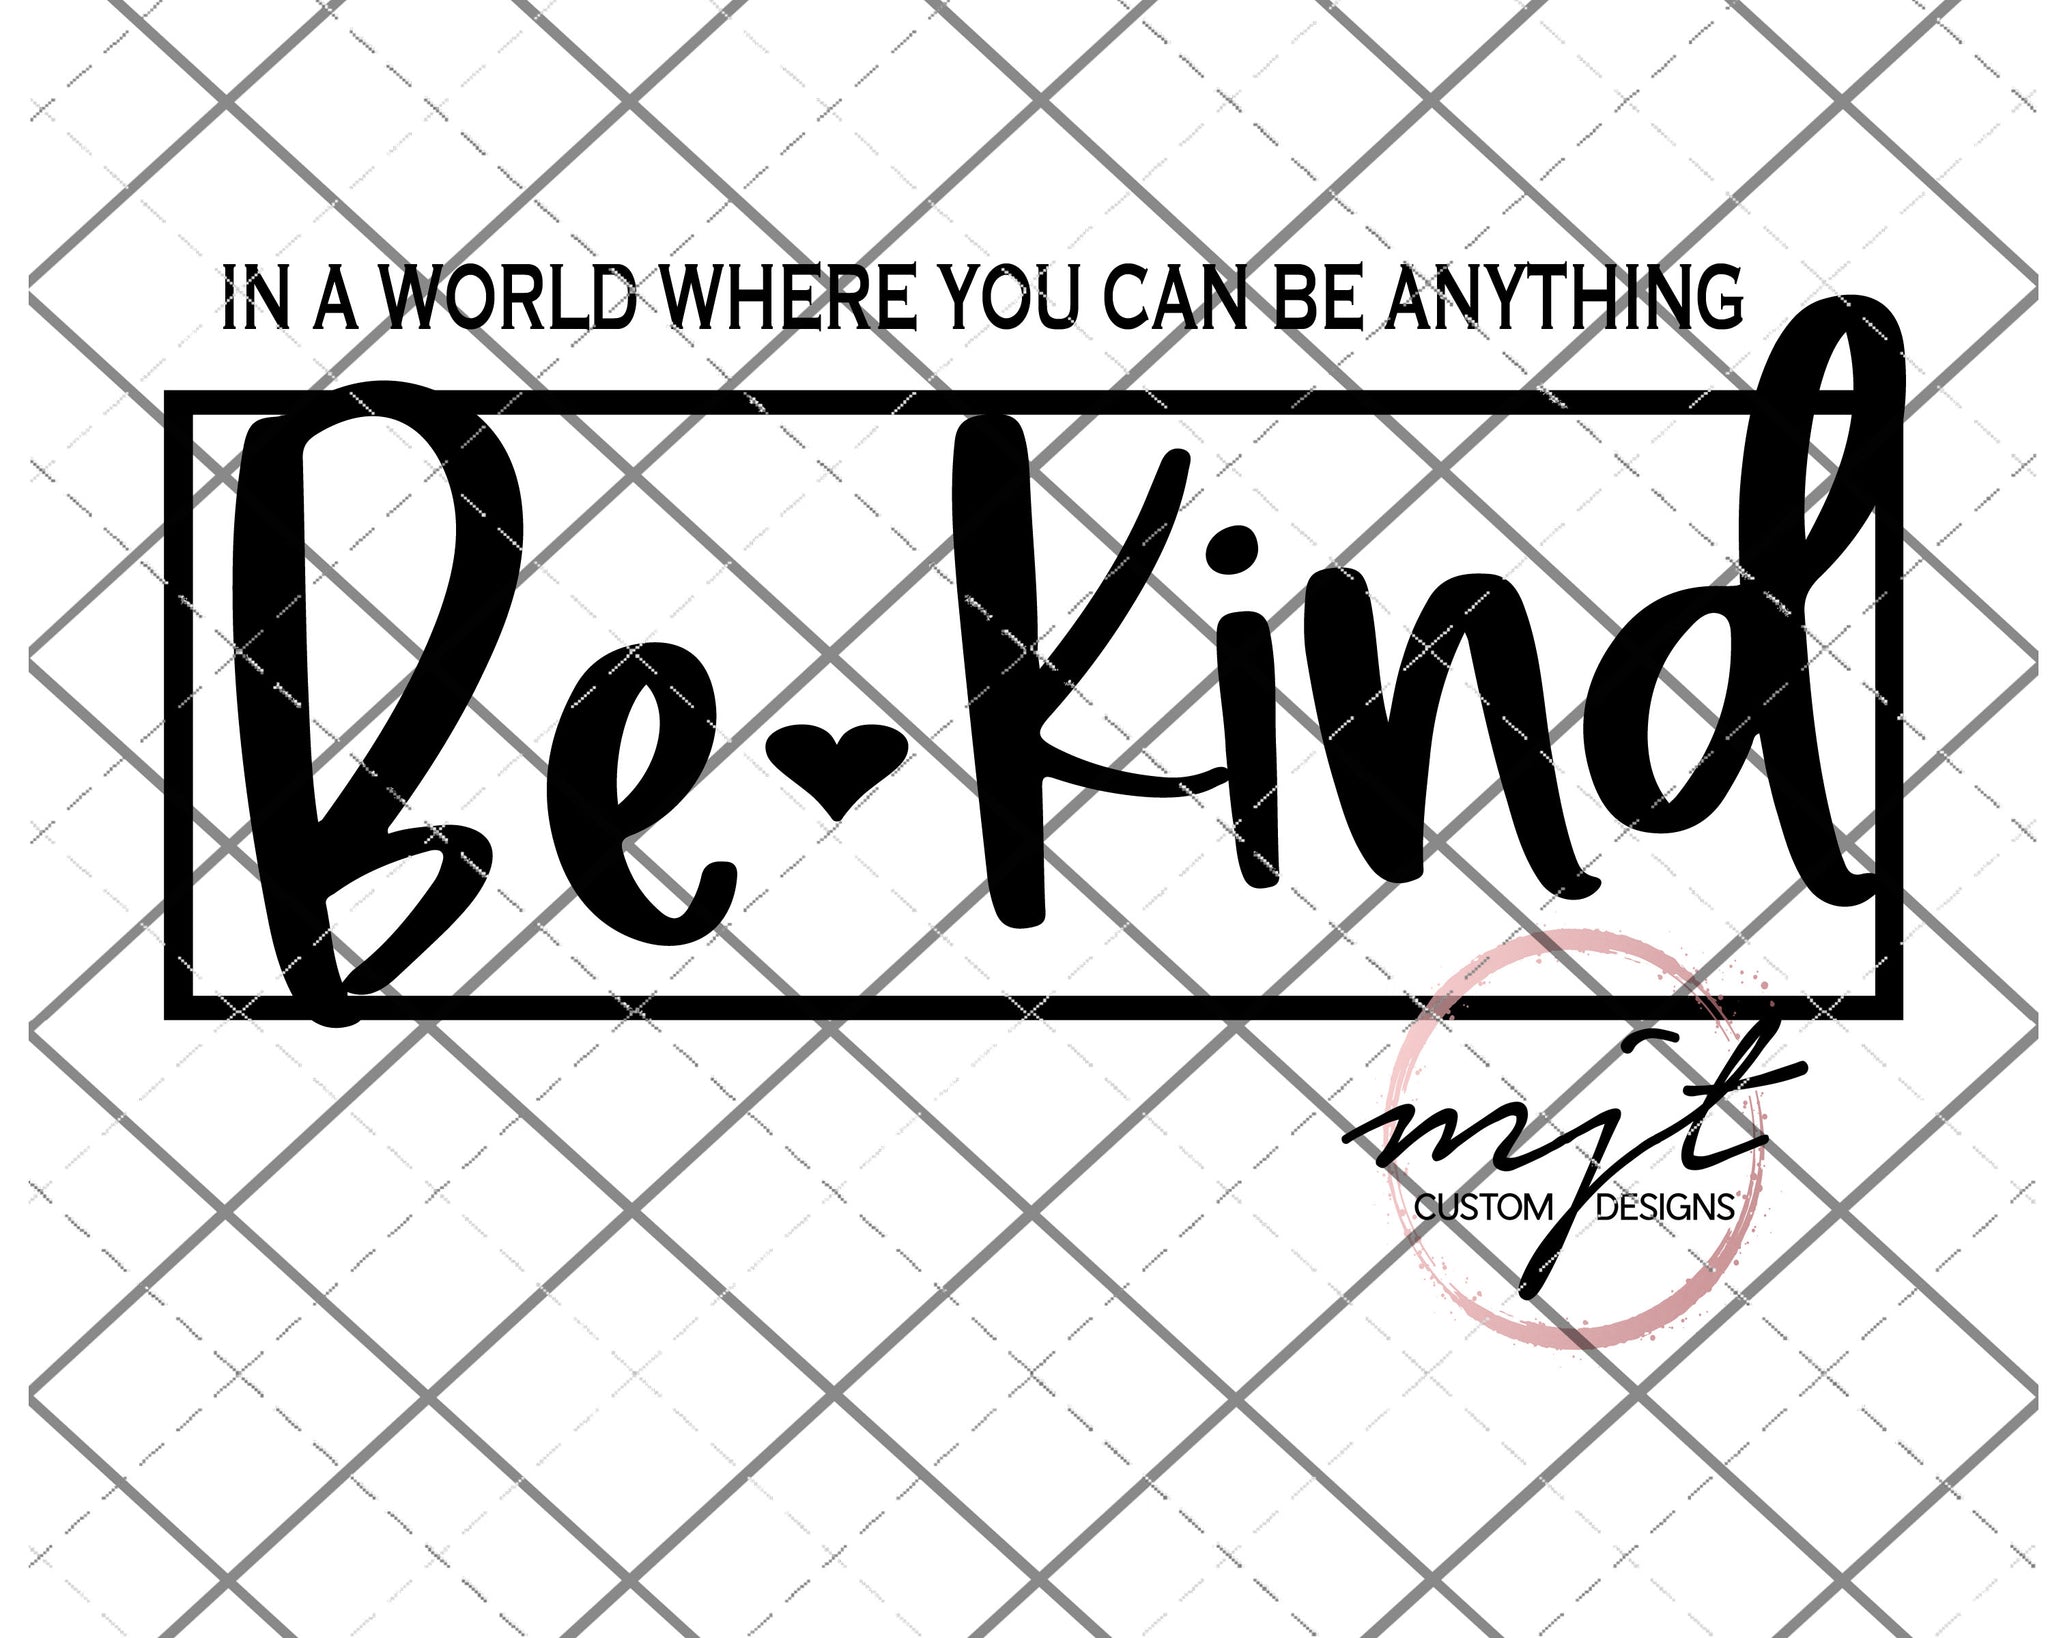 Be Kind - SVG AND PNG Files